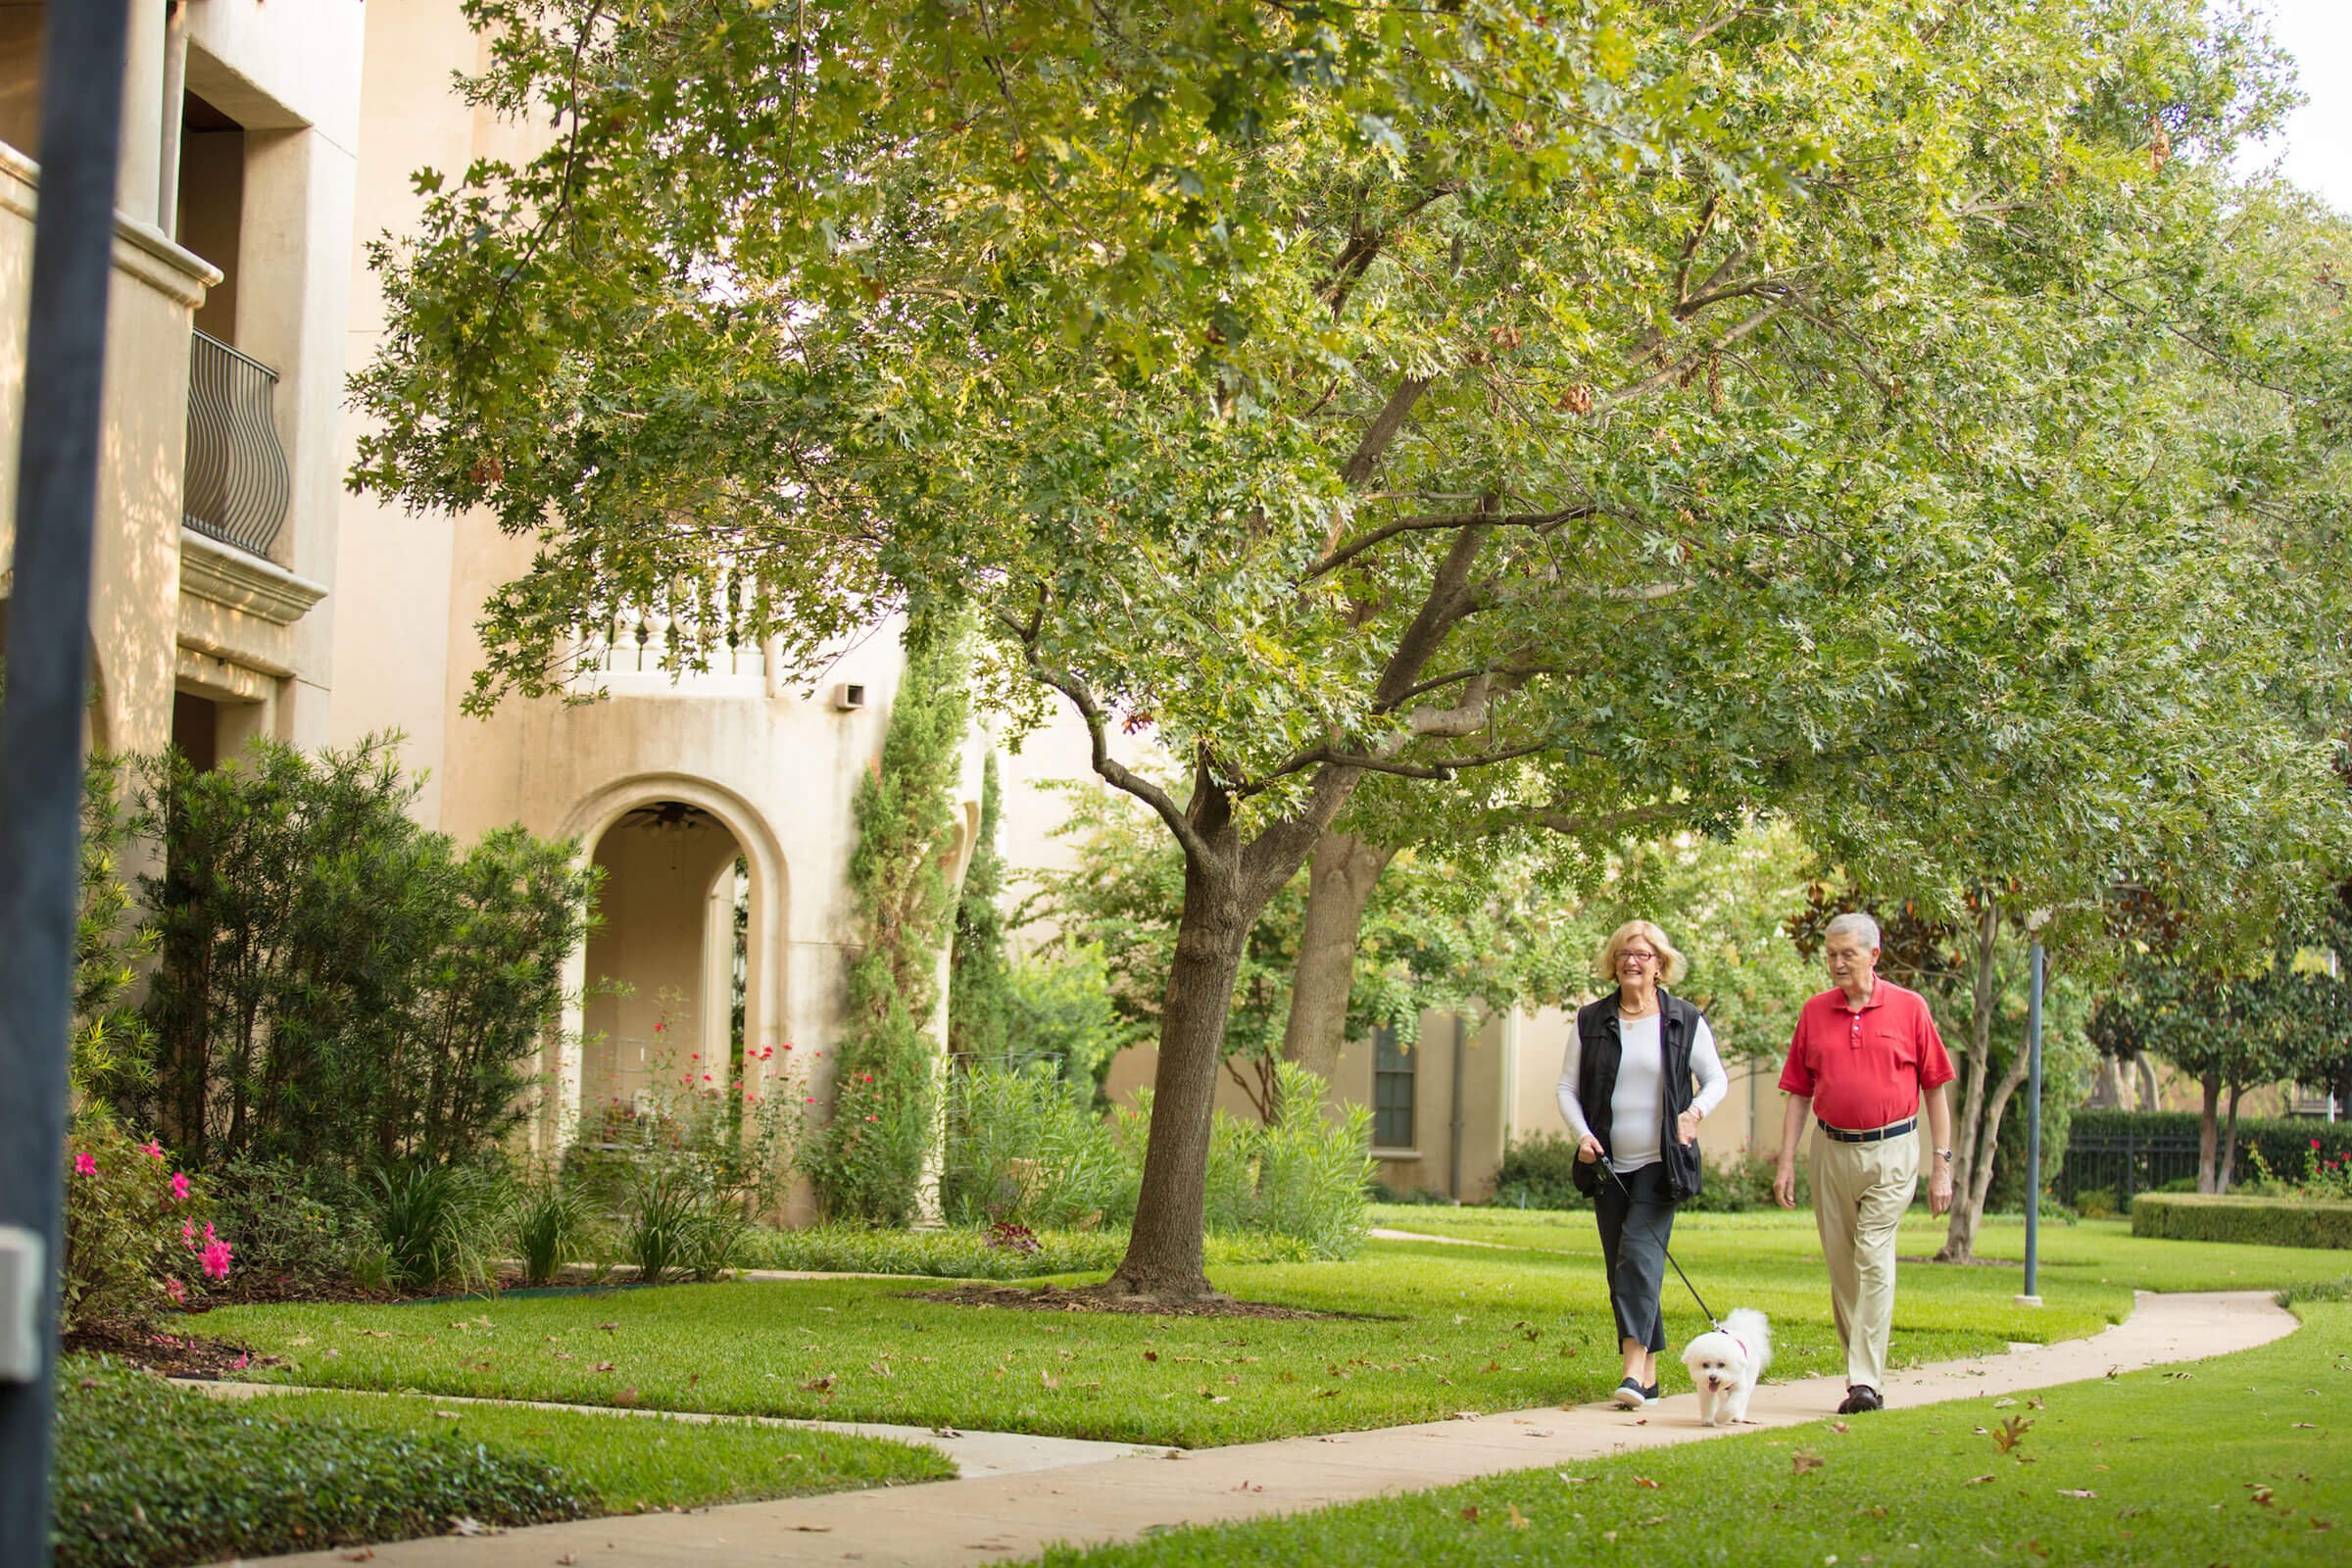 Senior couple walking their small white dog outside on a sidewalk surrounded by a beautiful green landscape